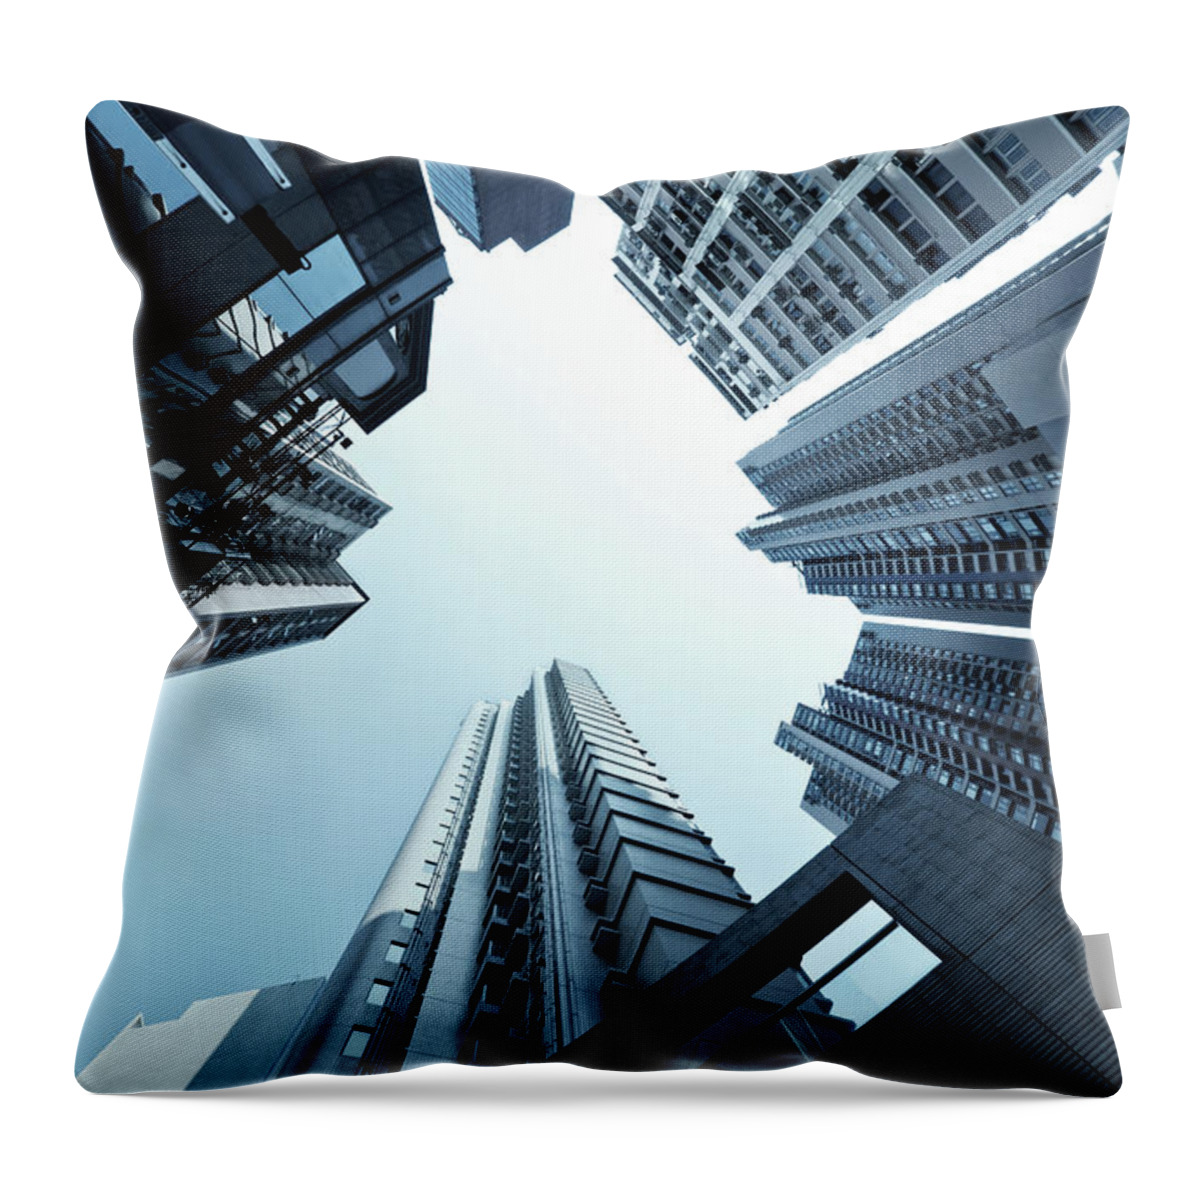 Crowd Throw Pillow featuring the photograph Residential Buildings In Hong Kong by Nikada